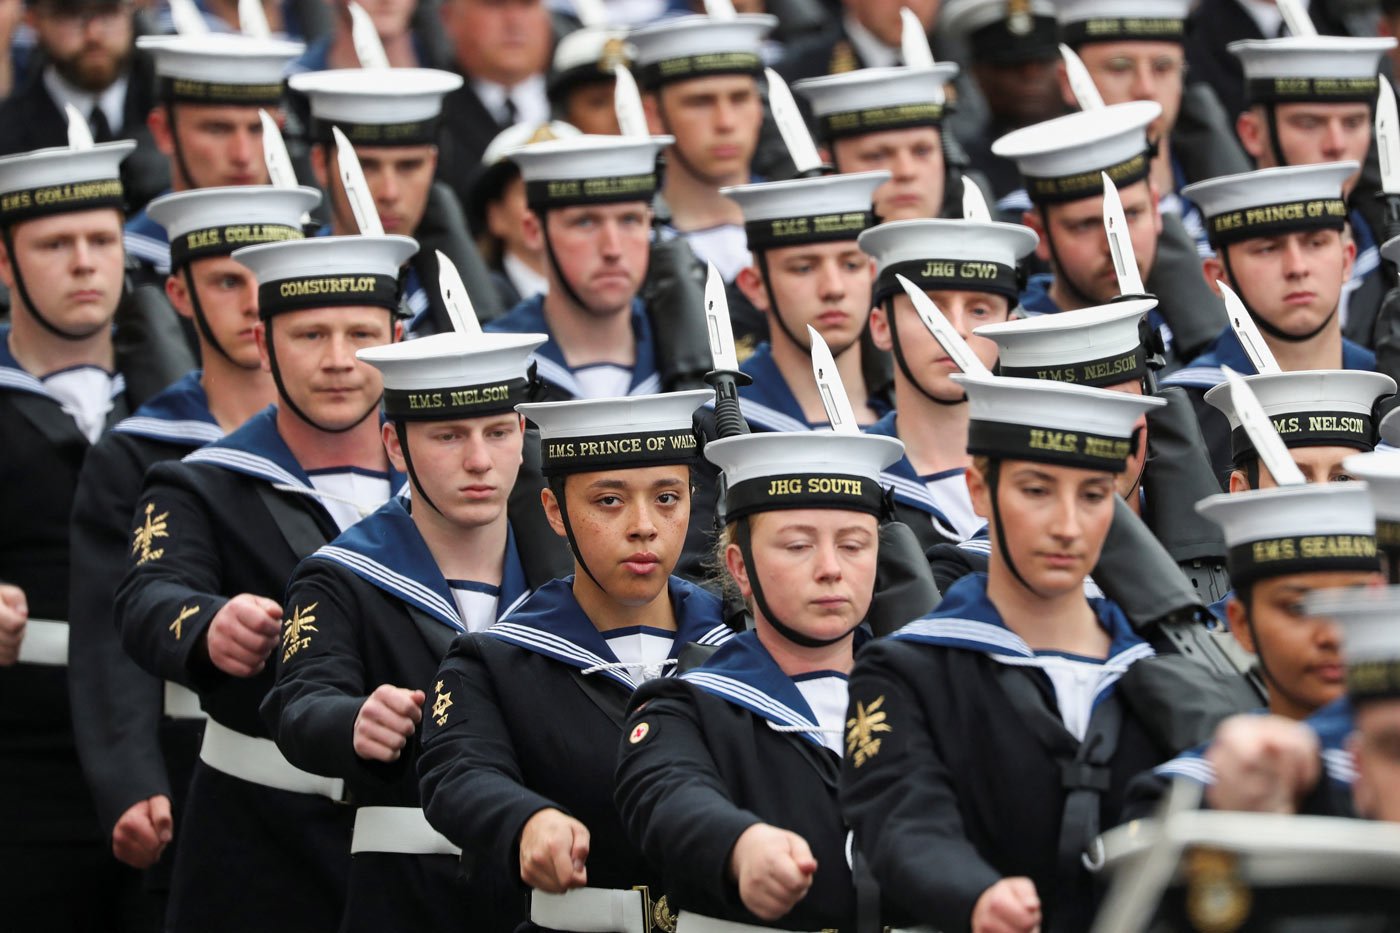 The Royal Navy contingent march toward their positions before the coronation ceremony